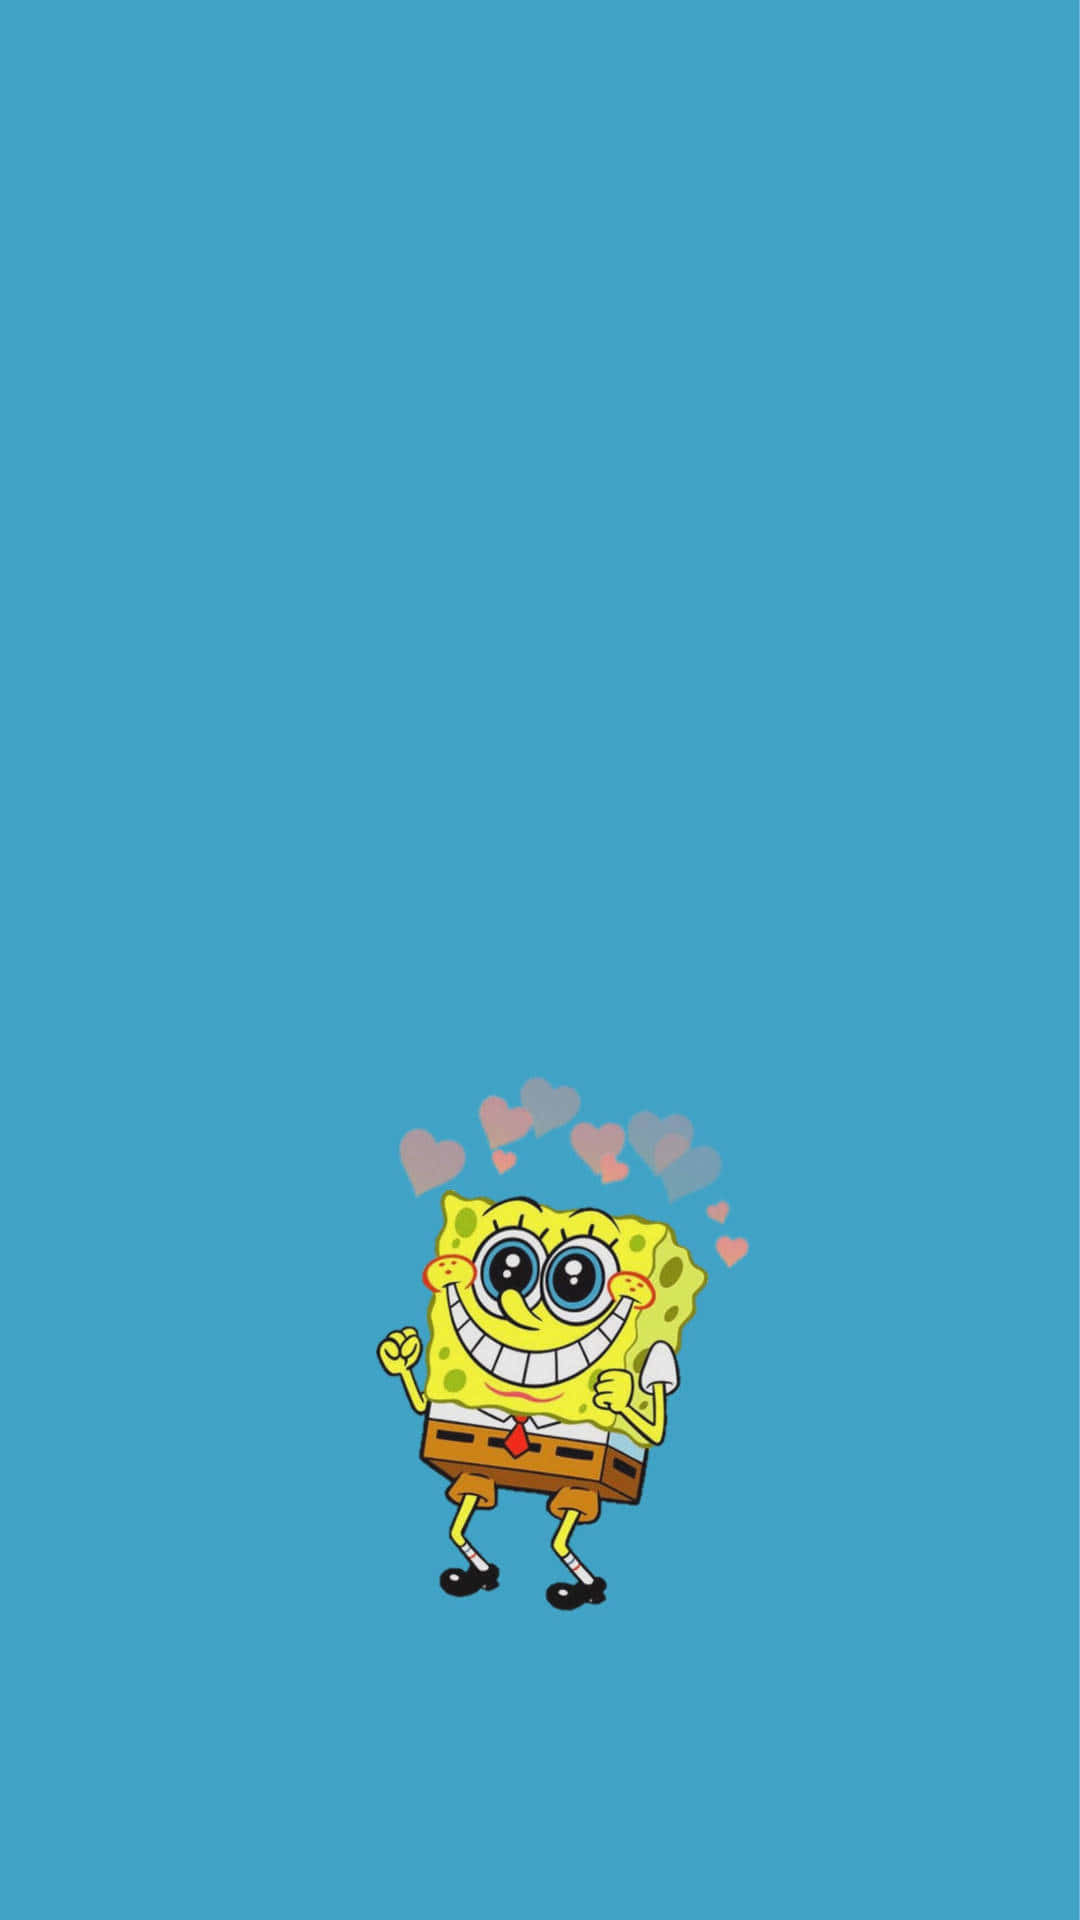 Spongebob looking out to sea - an aesthetic wallpaper.